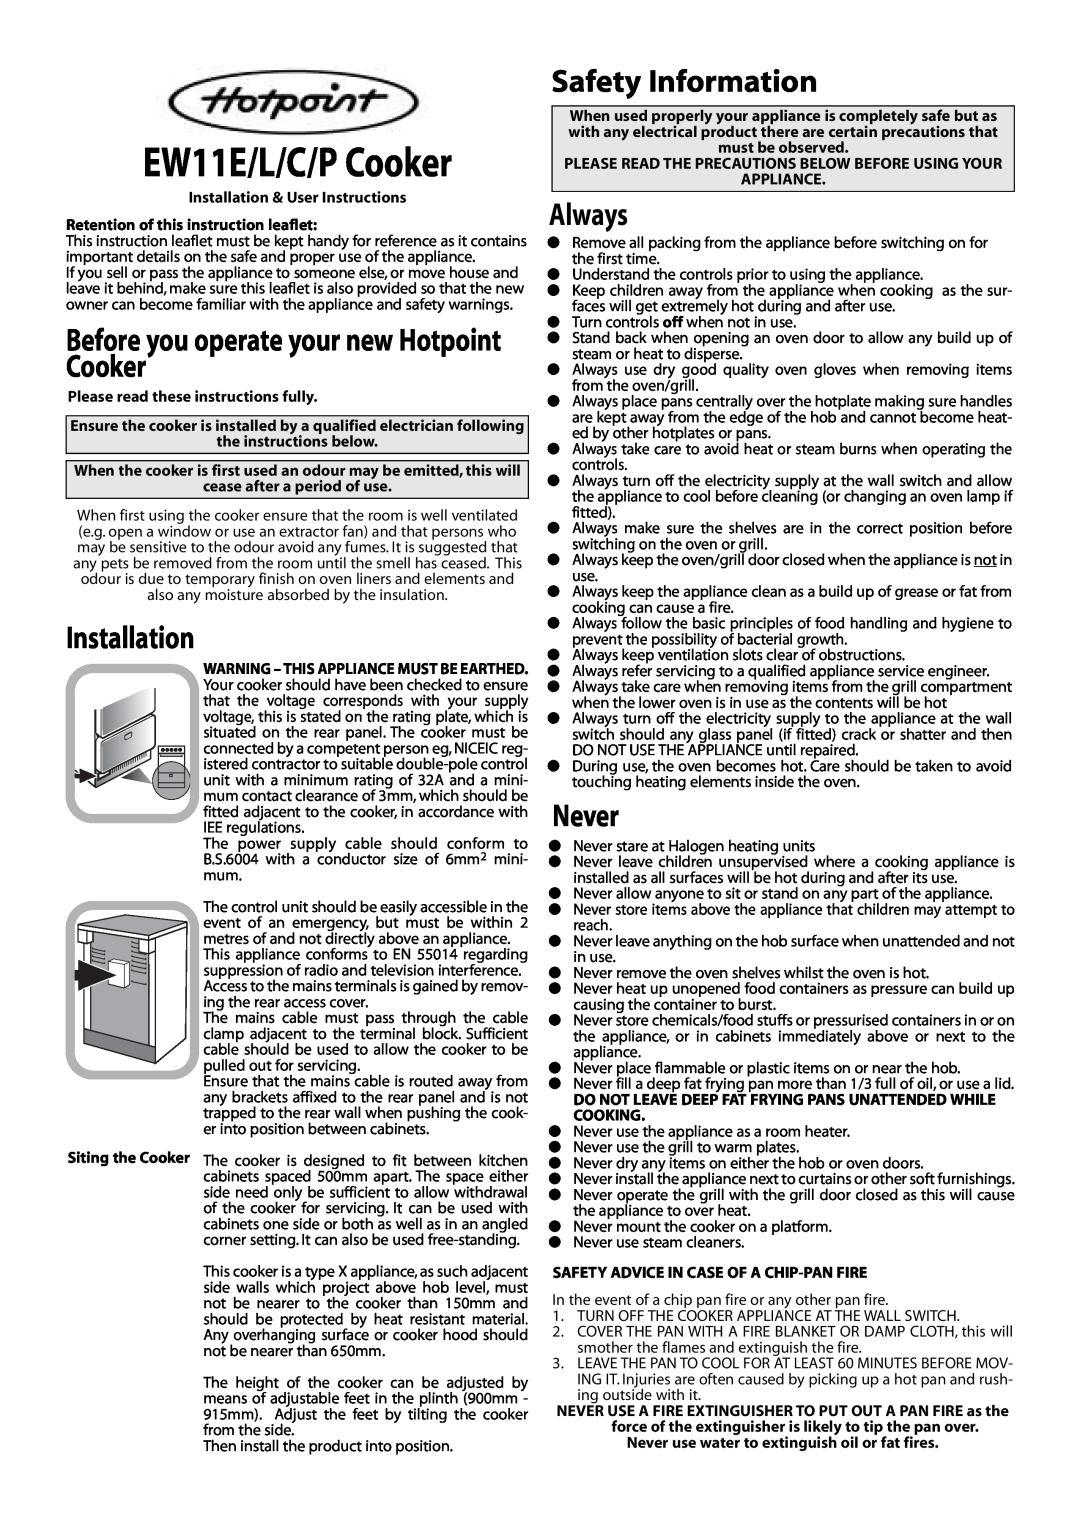 Hotpoint manual Before you operate your new Hotpoint Cooker, Safety Information, Always, Never, EW11E/L/C/P Cooker 